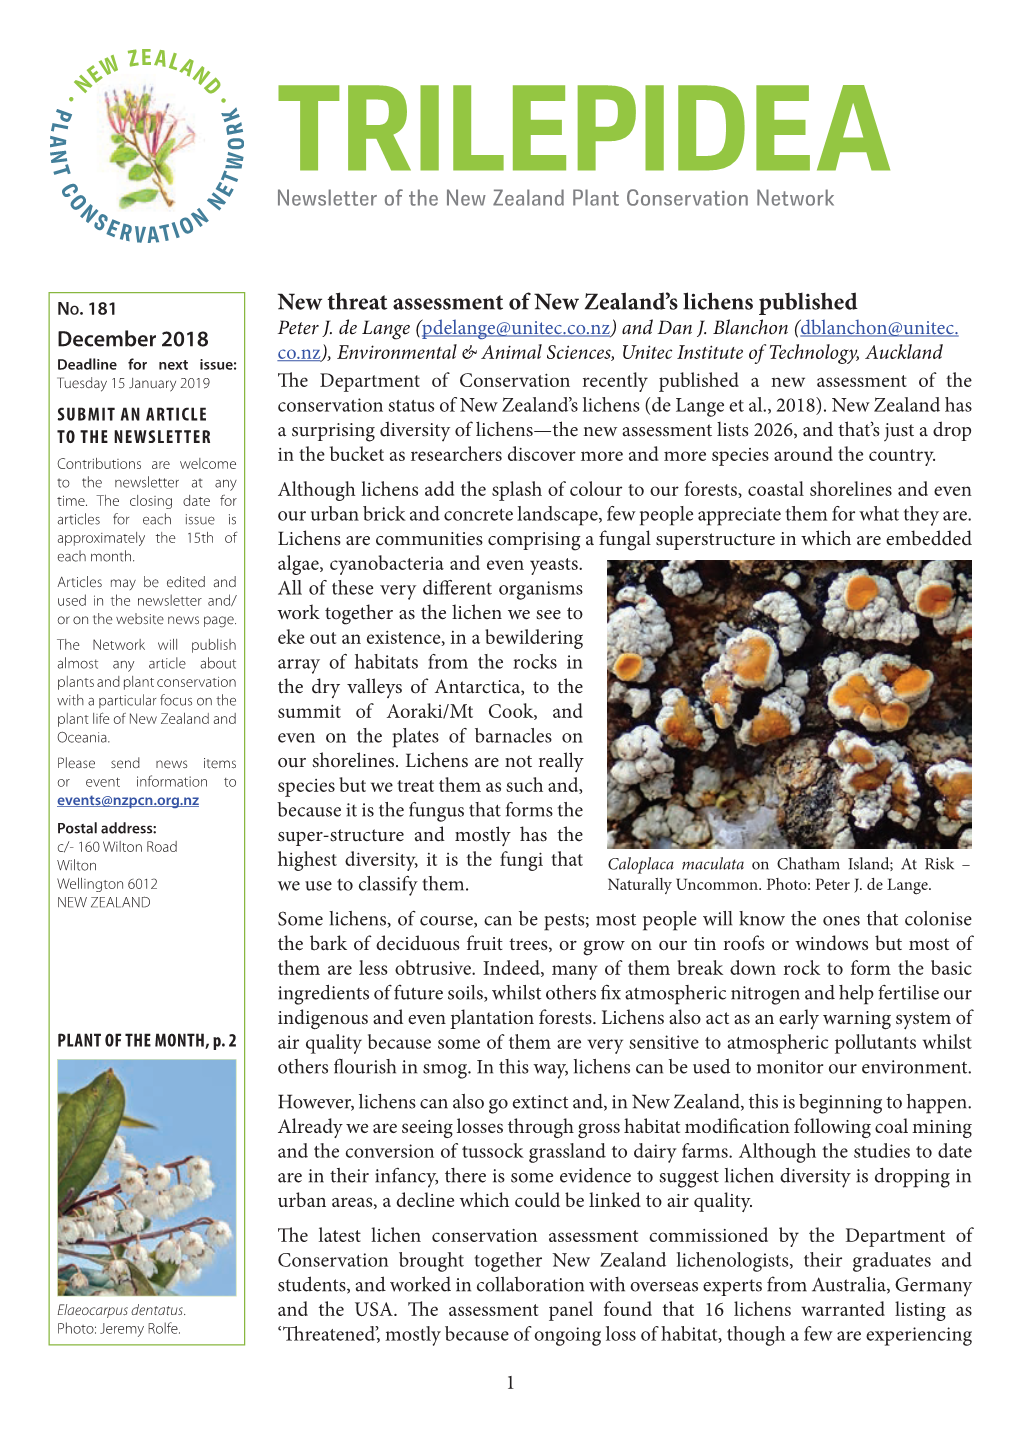 New Threat Assessment of New Zealand's Lichens Published